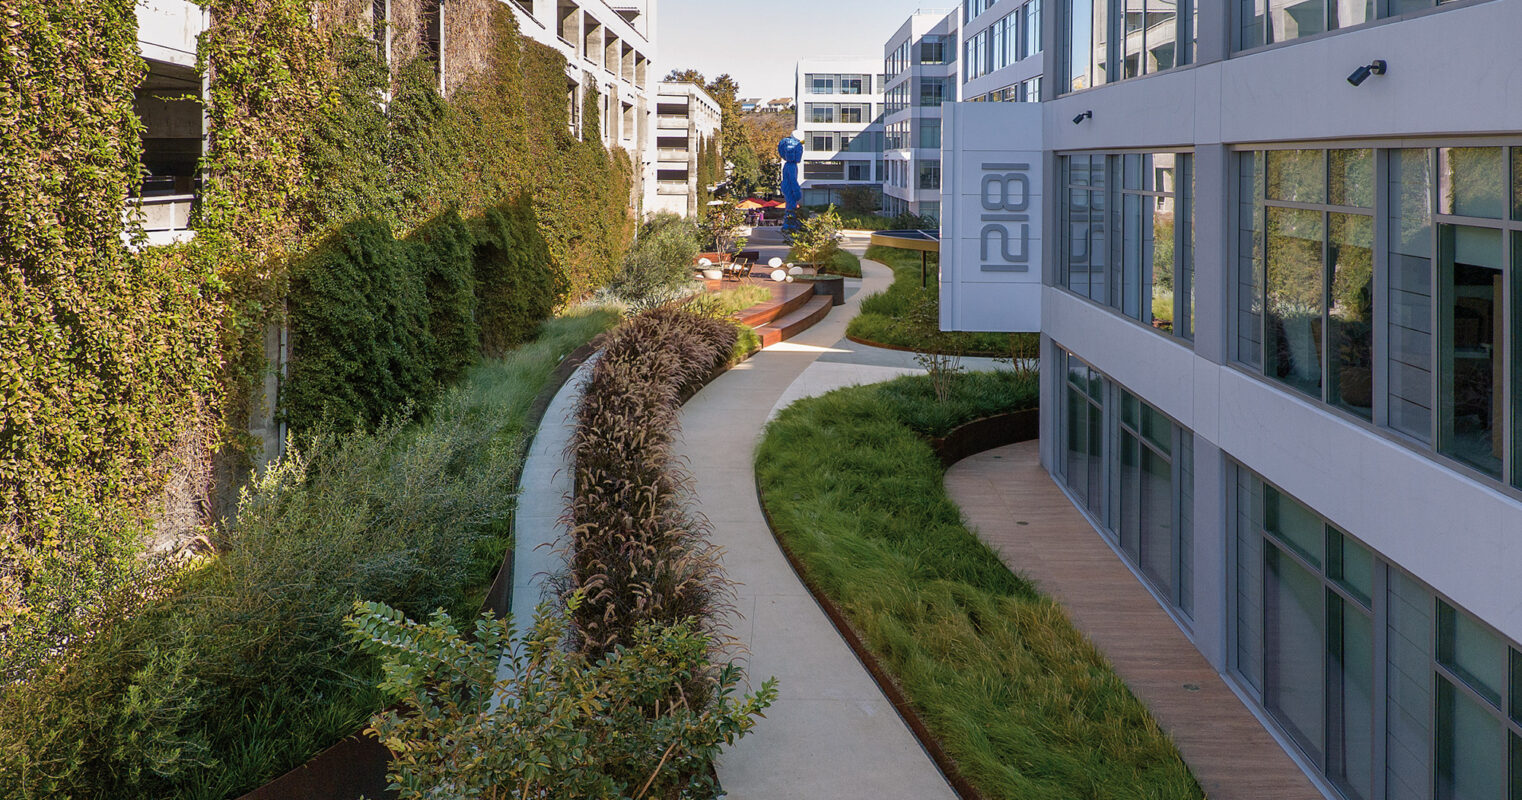 Modern office park with lush green landscaping featuring a winding pathway and contemporary architecture.